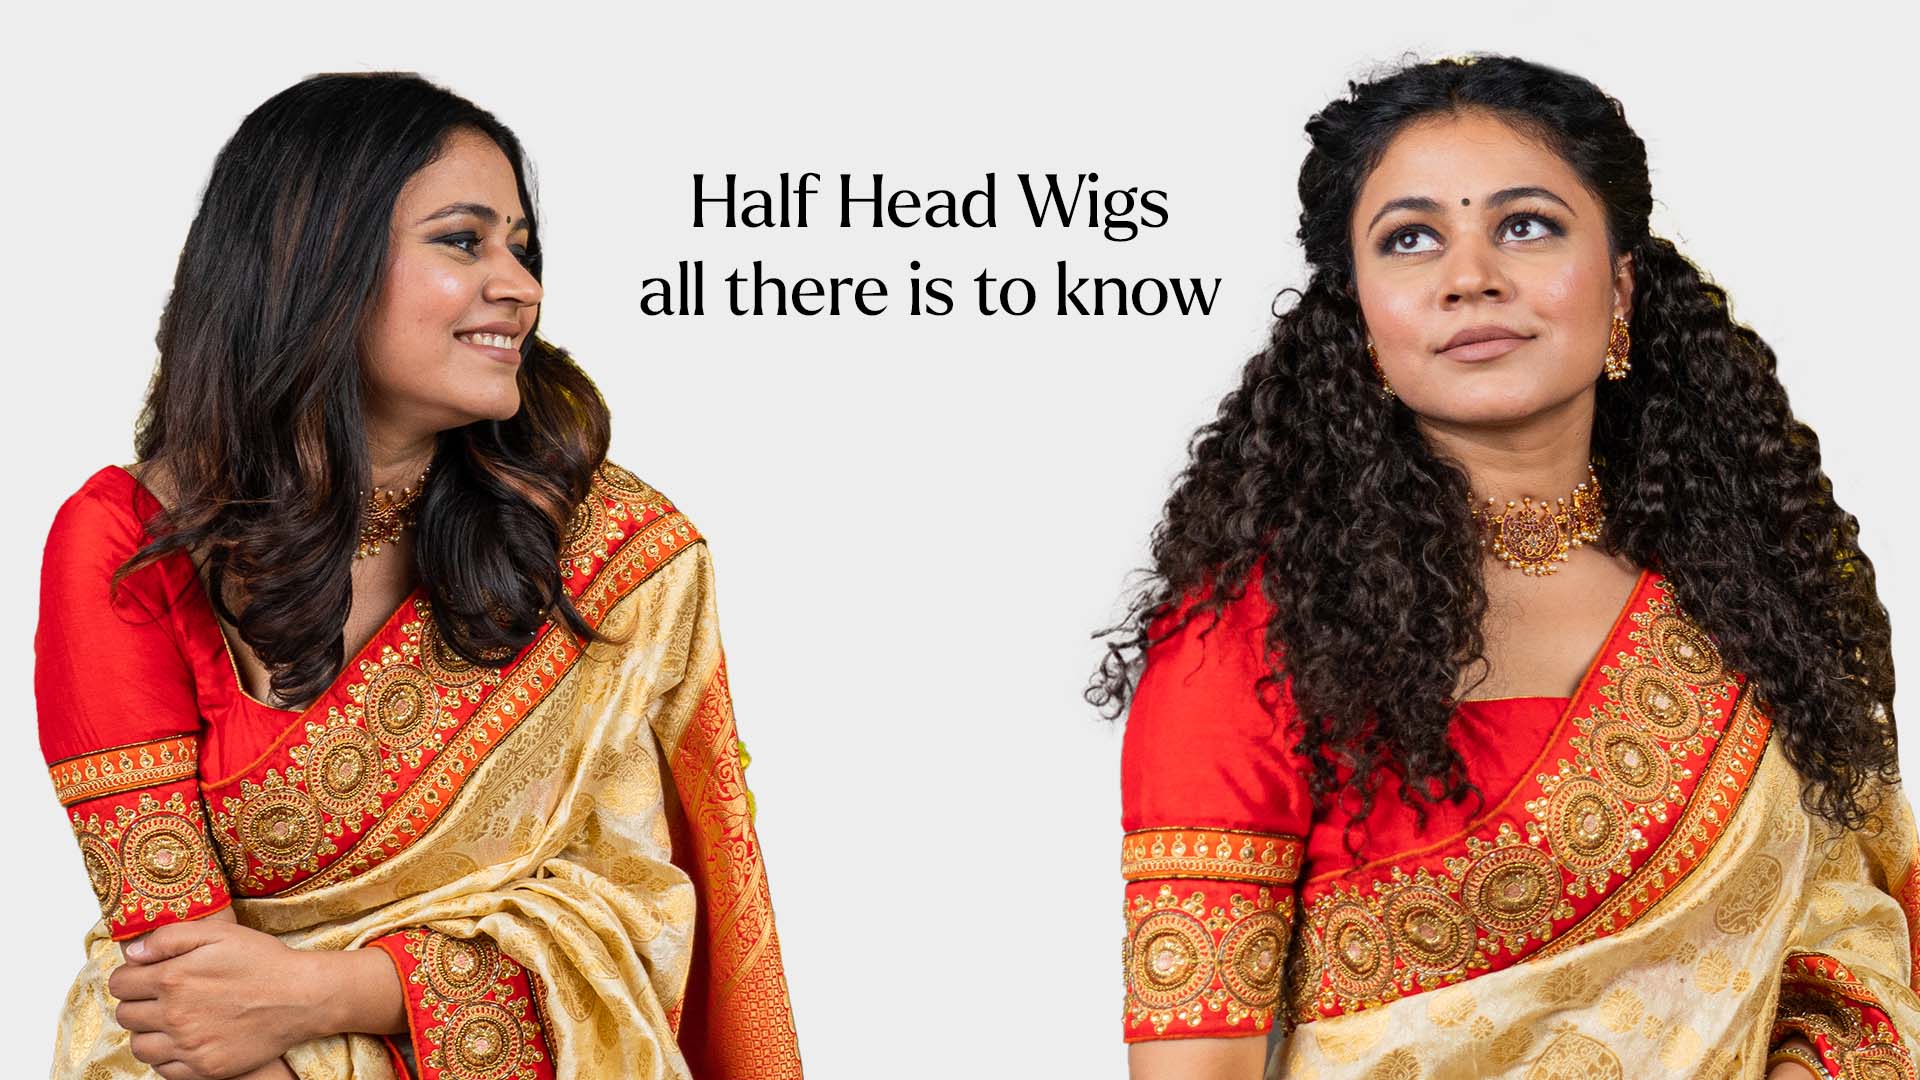 Half Head Wigs: All There Is to Know